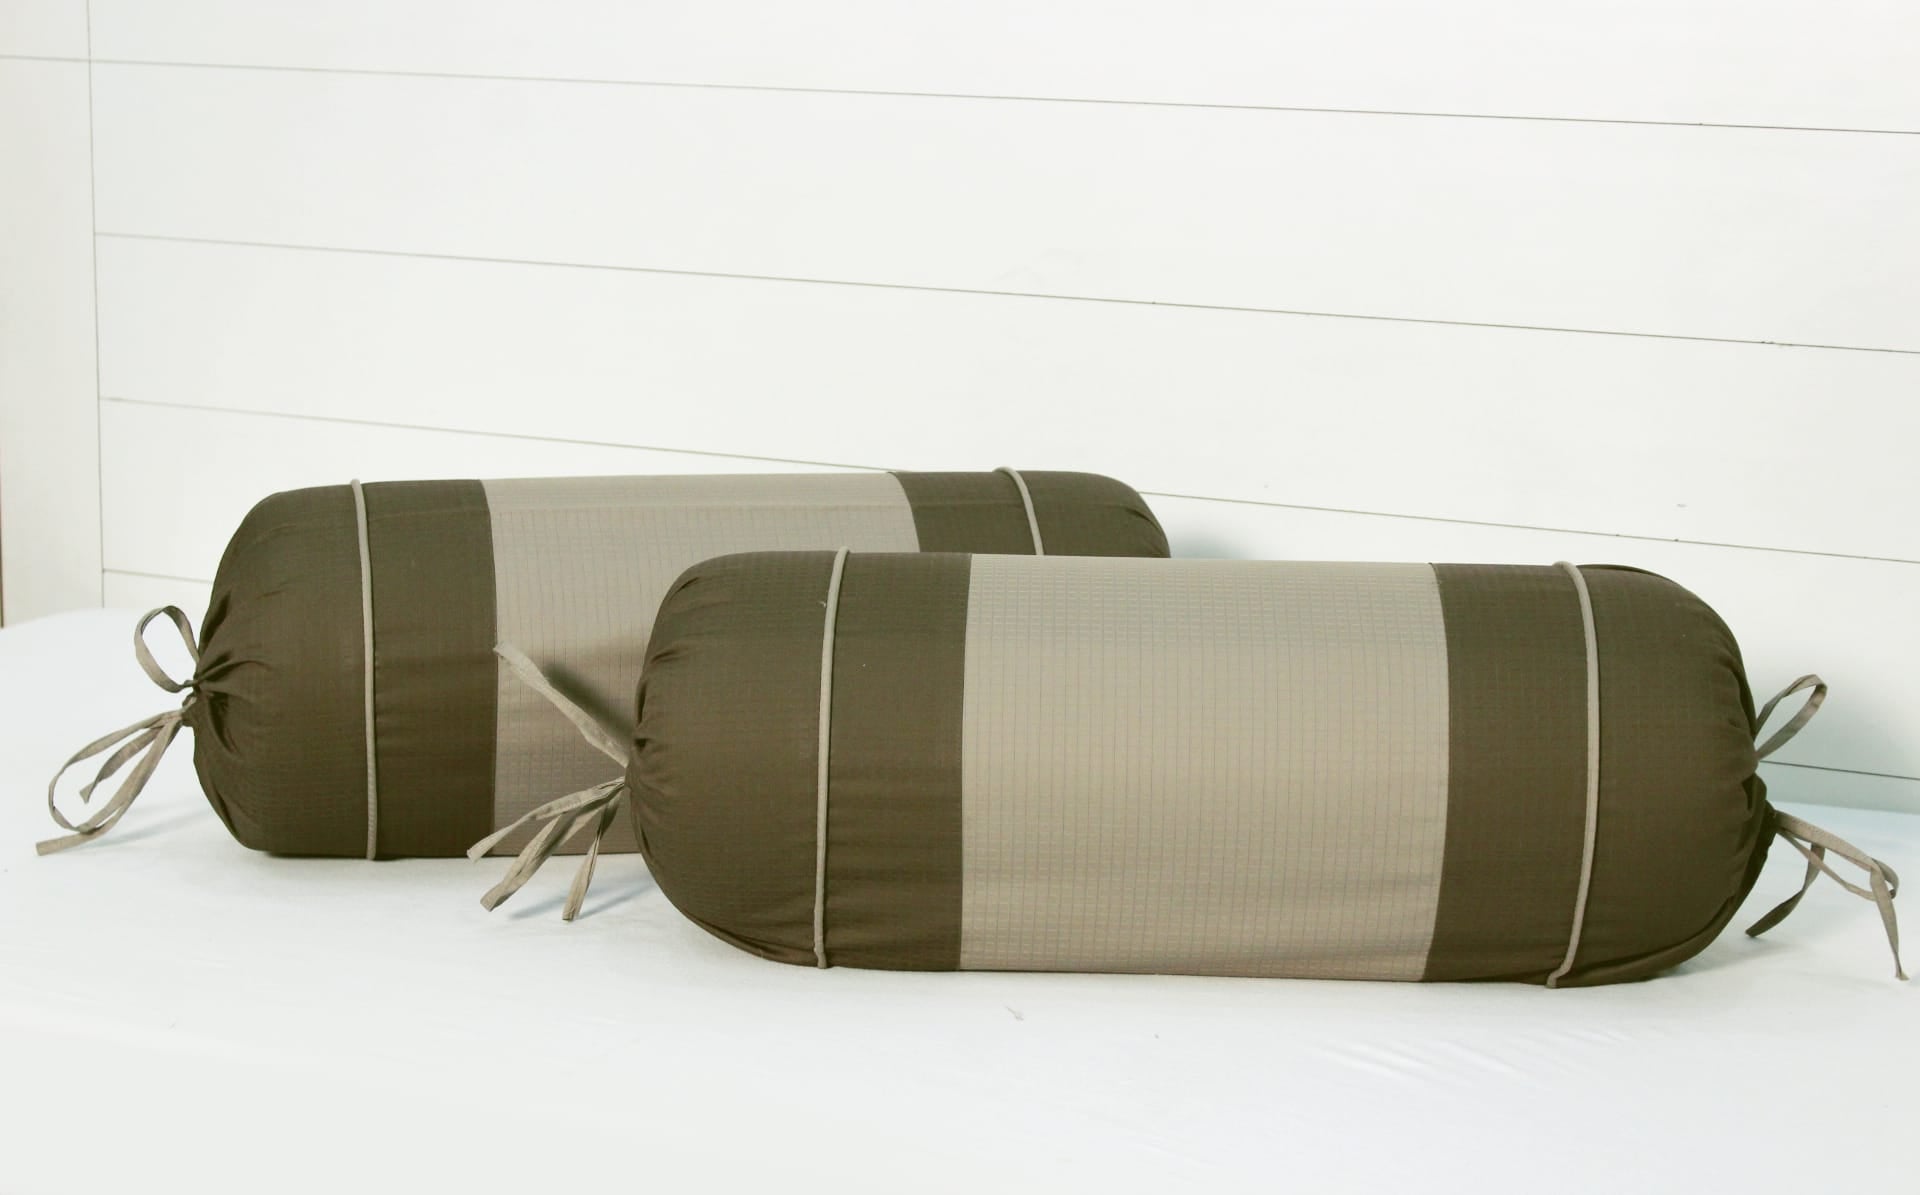 Soft Textured Cotton Bolster Cover Set in Brown online - 2Pcs 